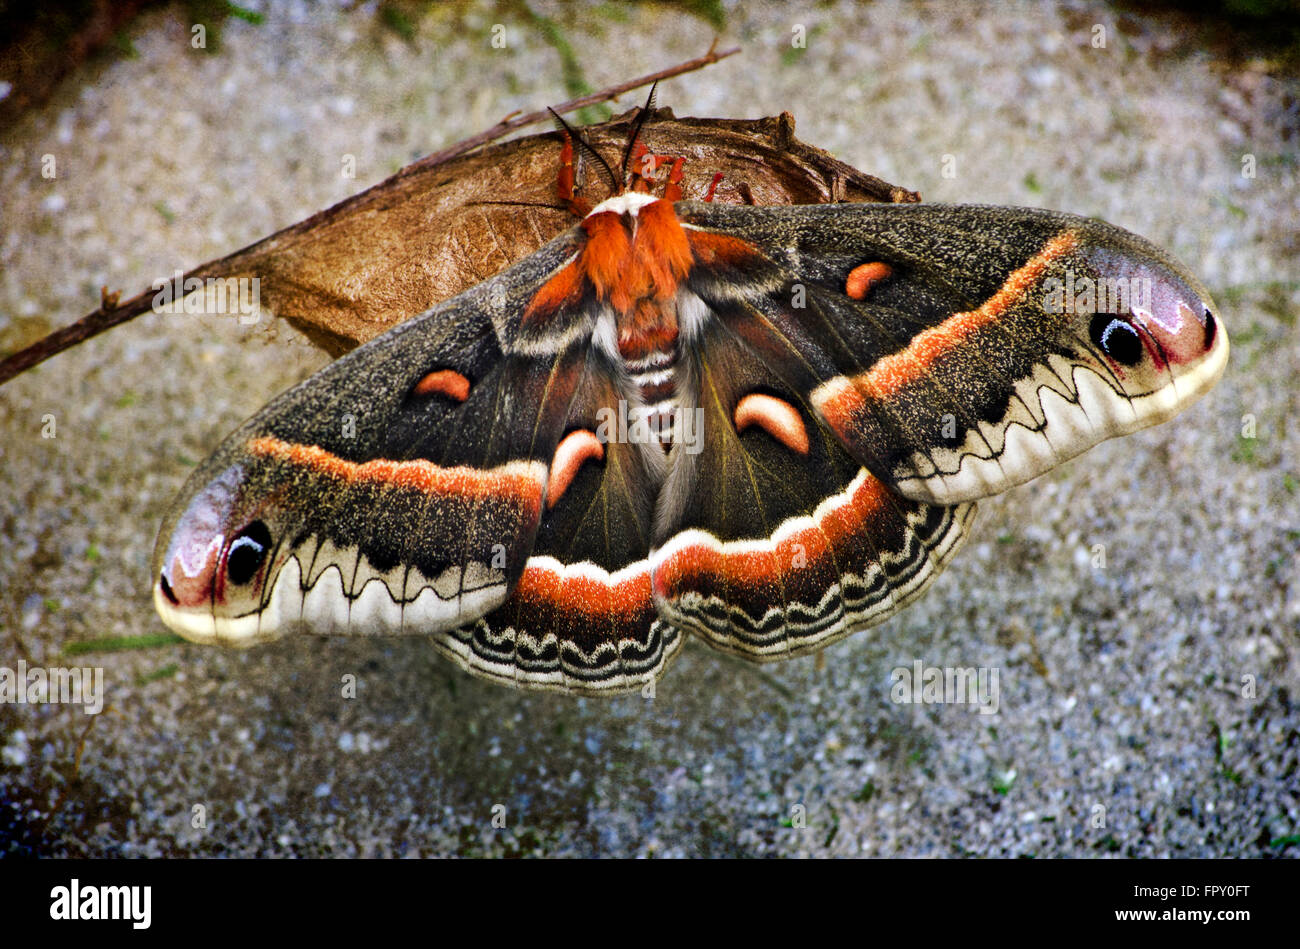 Cecropia moth on cocoon newly emerged close up Stock Photo